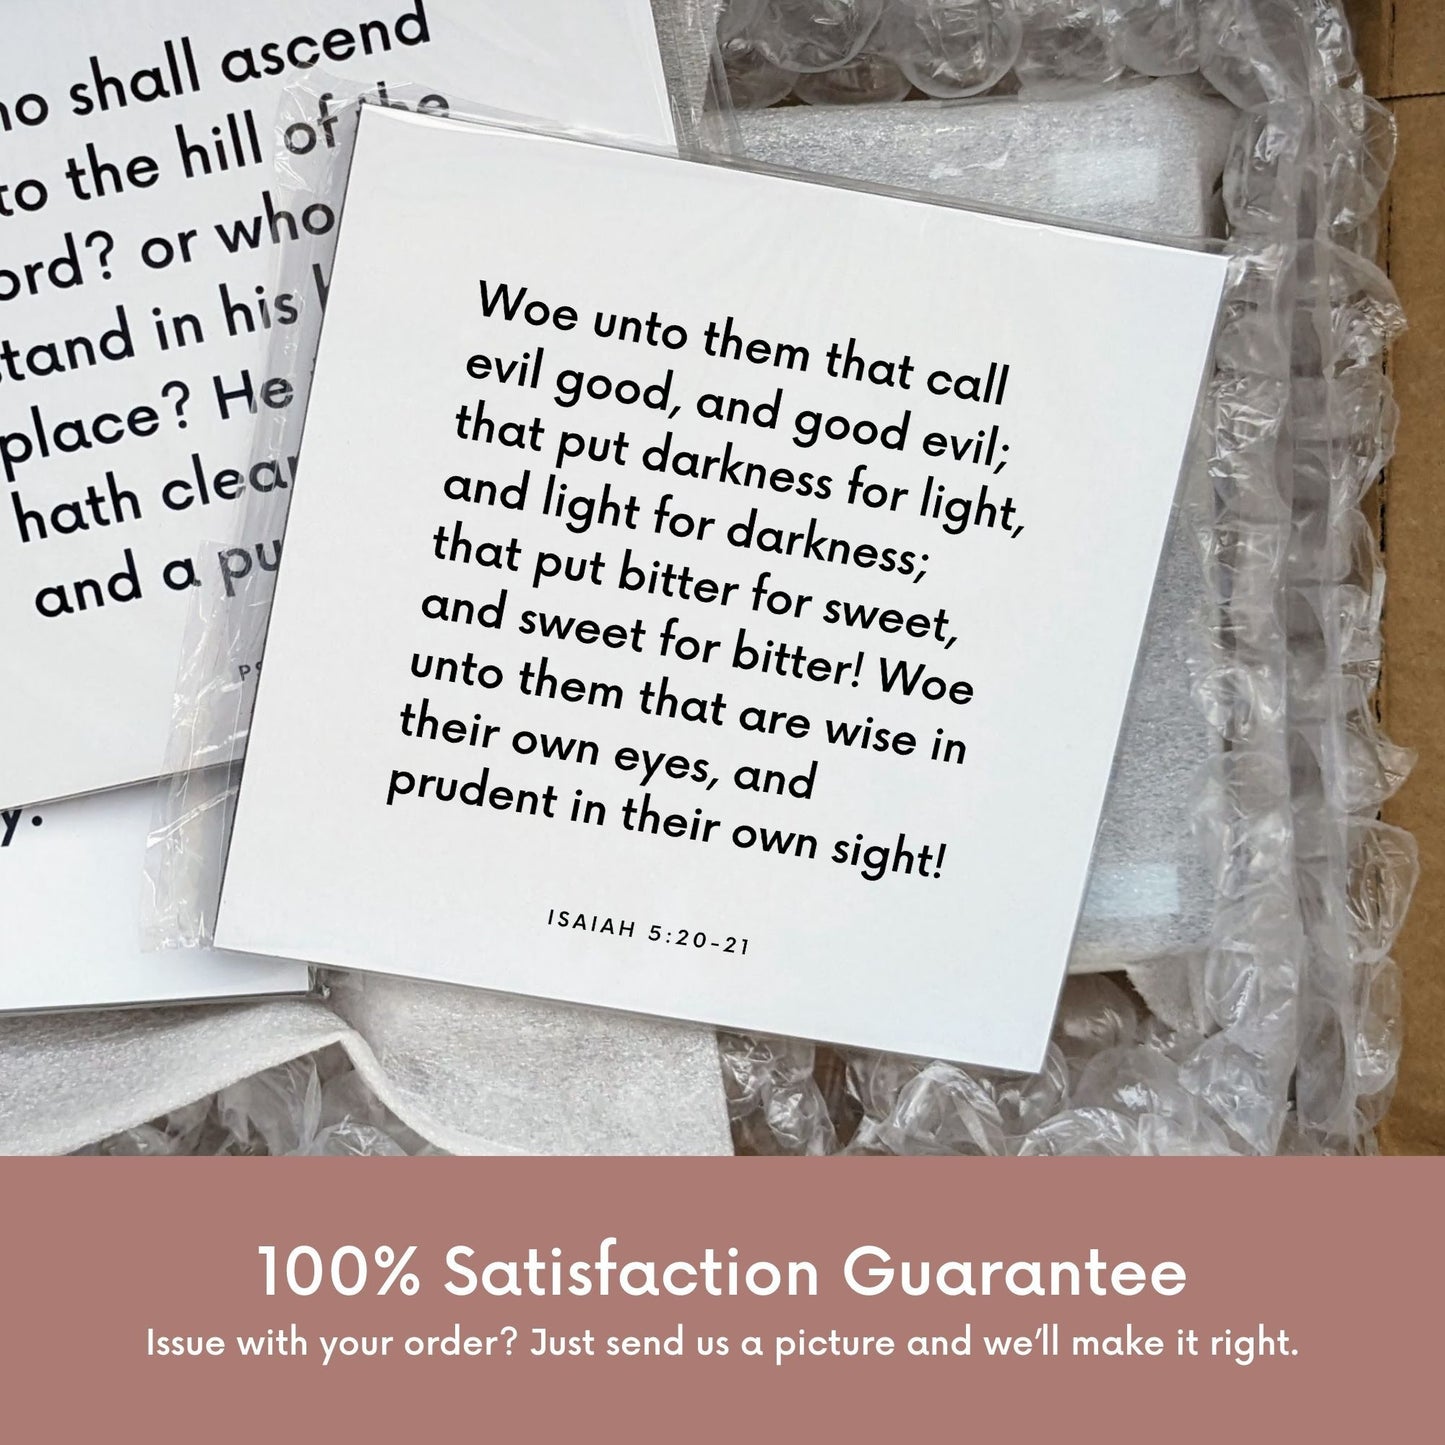 Shipping materials for scripture tile of Isaiah 5:20-21 - "Woe unto them that call evil good, and good evil"